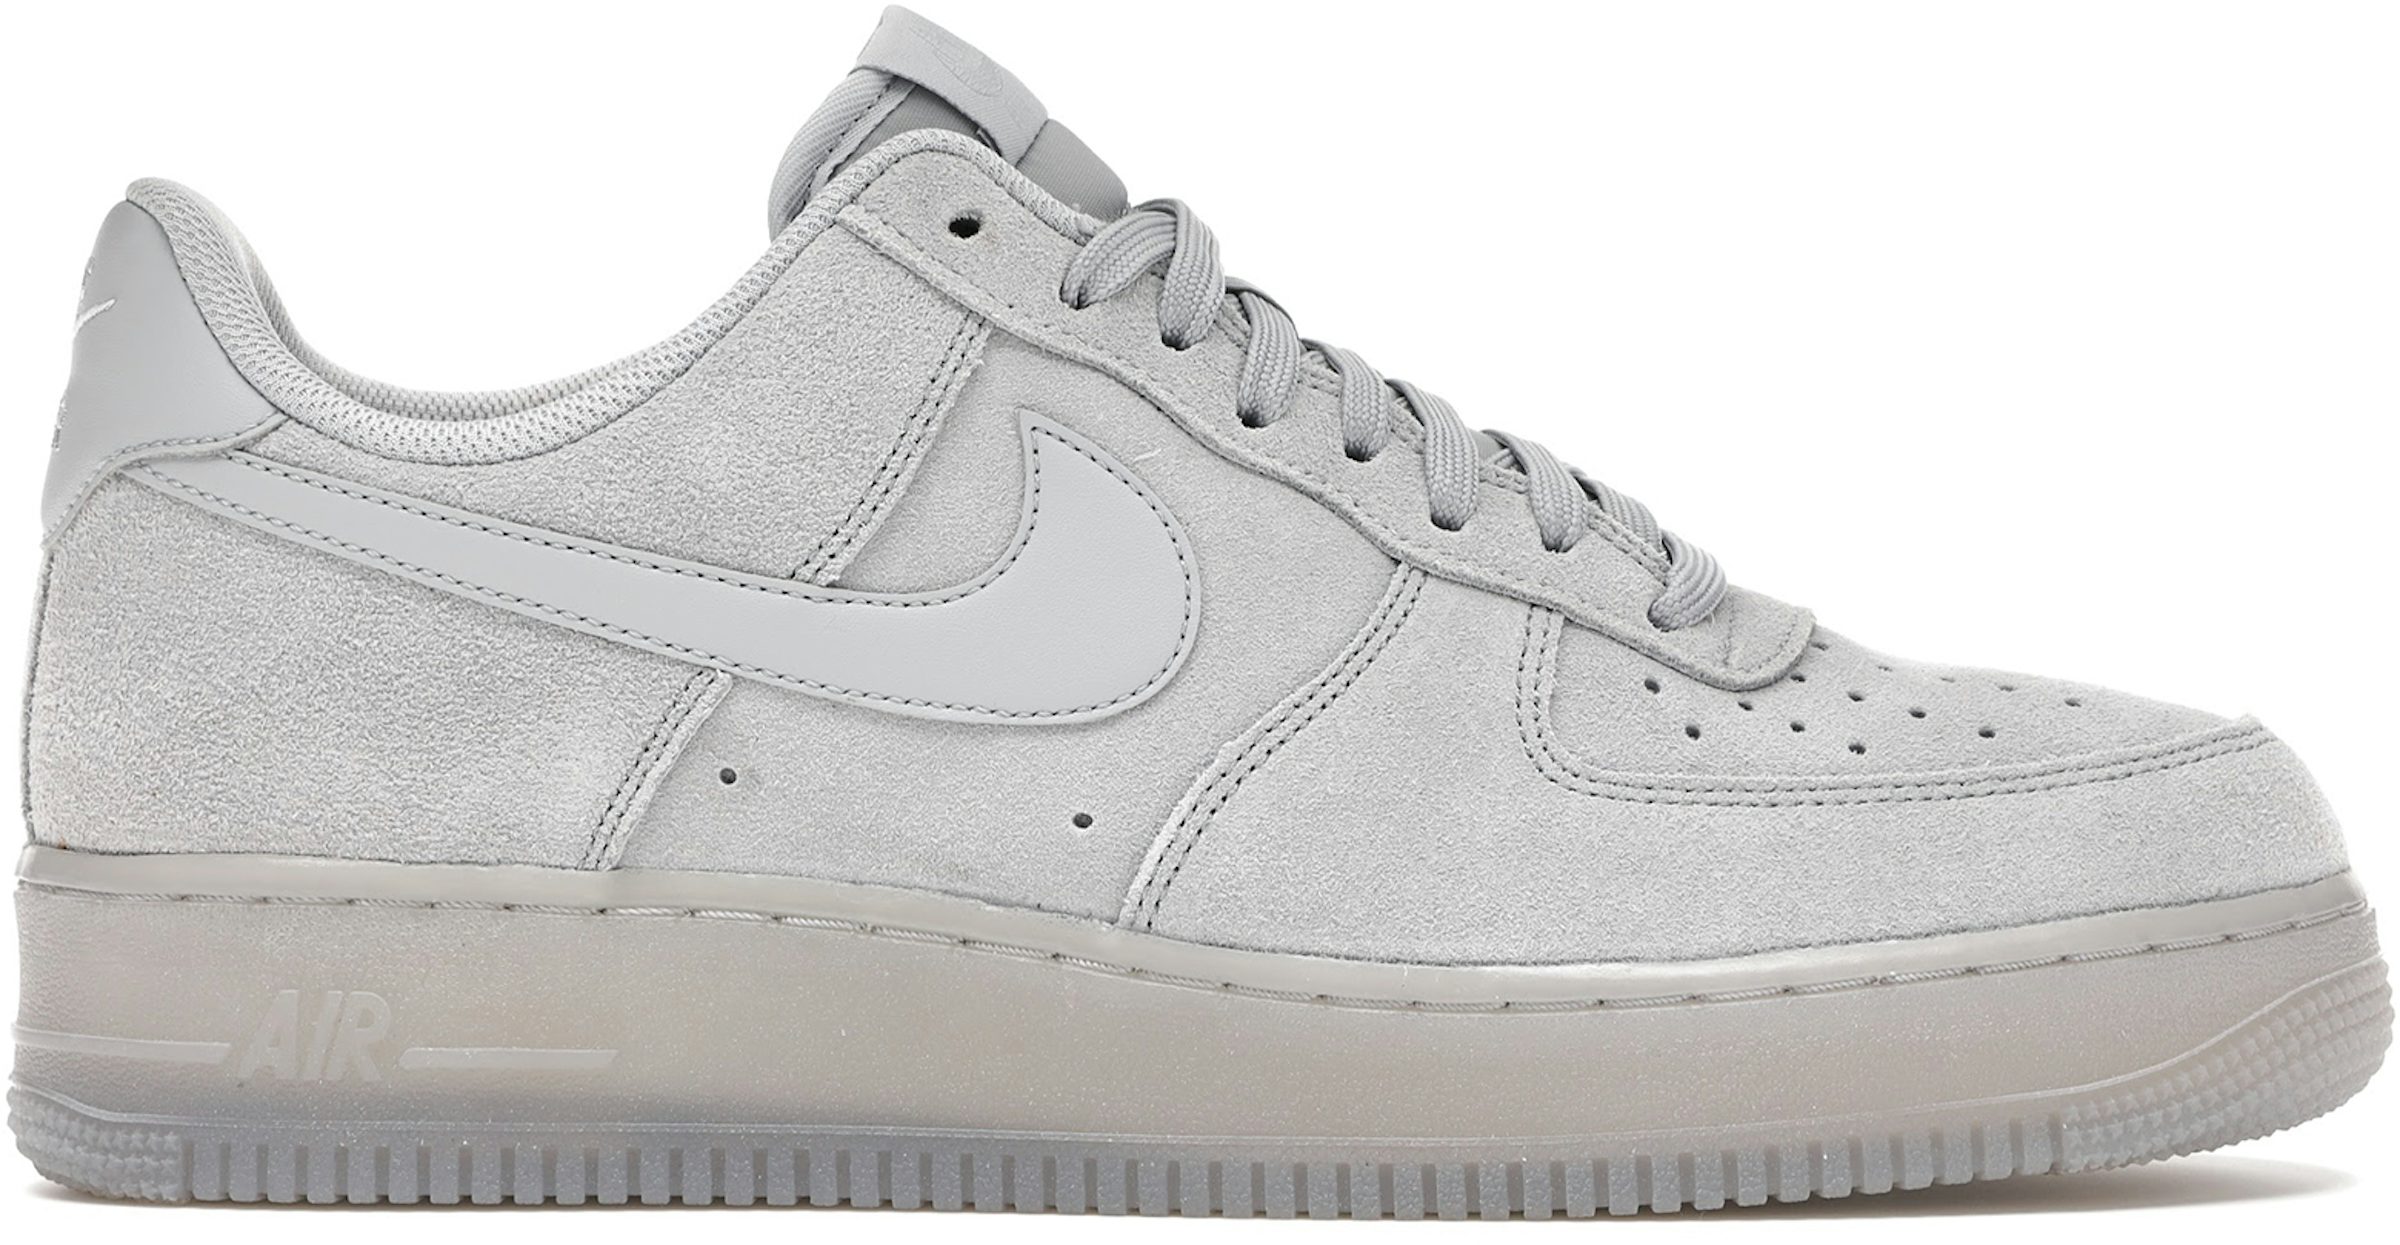 Look Out For The Nike Air Force 1 '07 LV8 NBA White Black